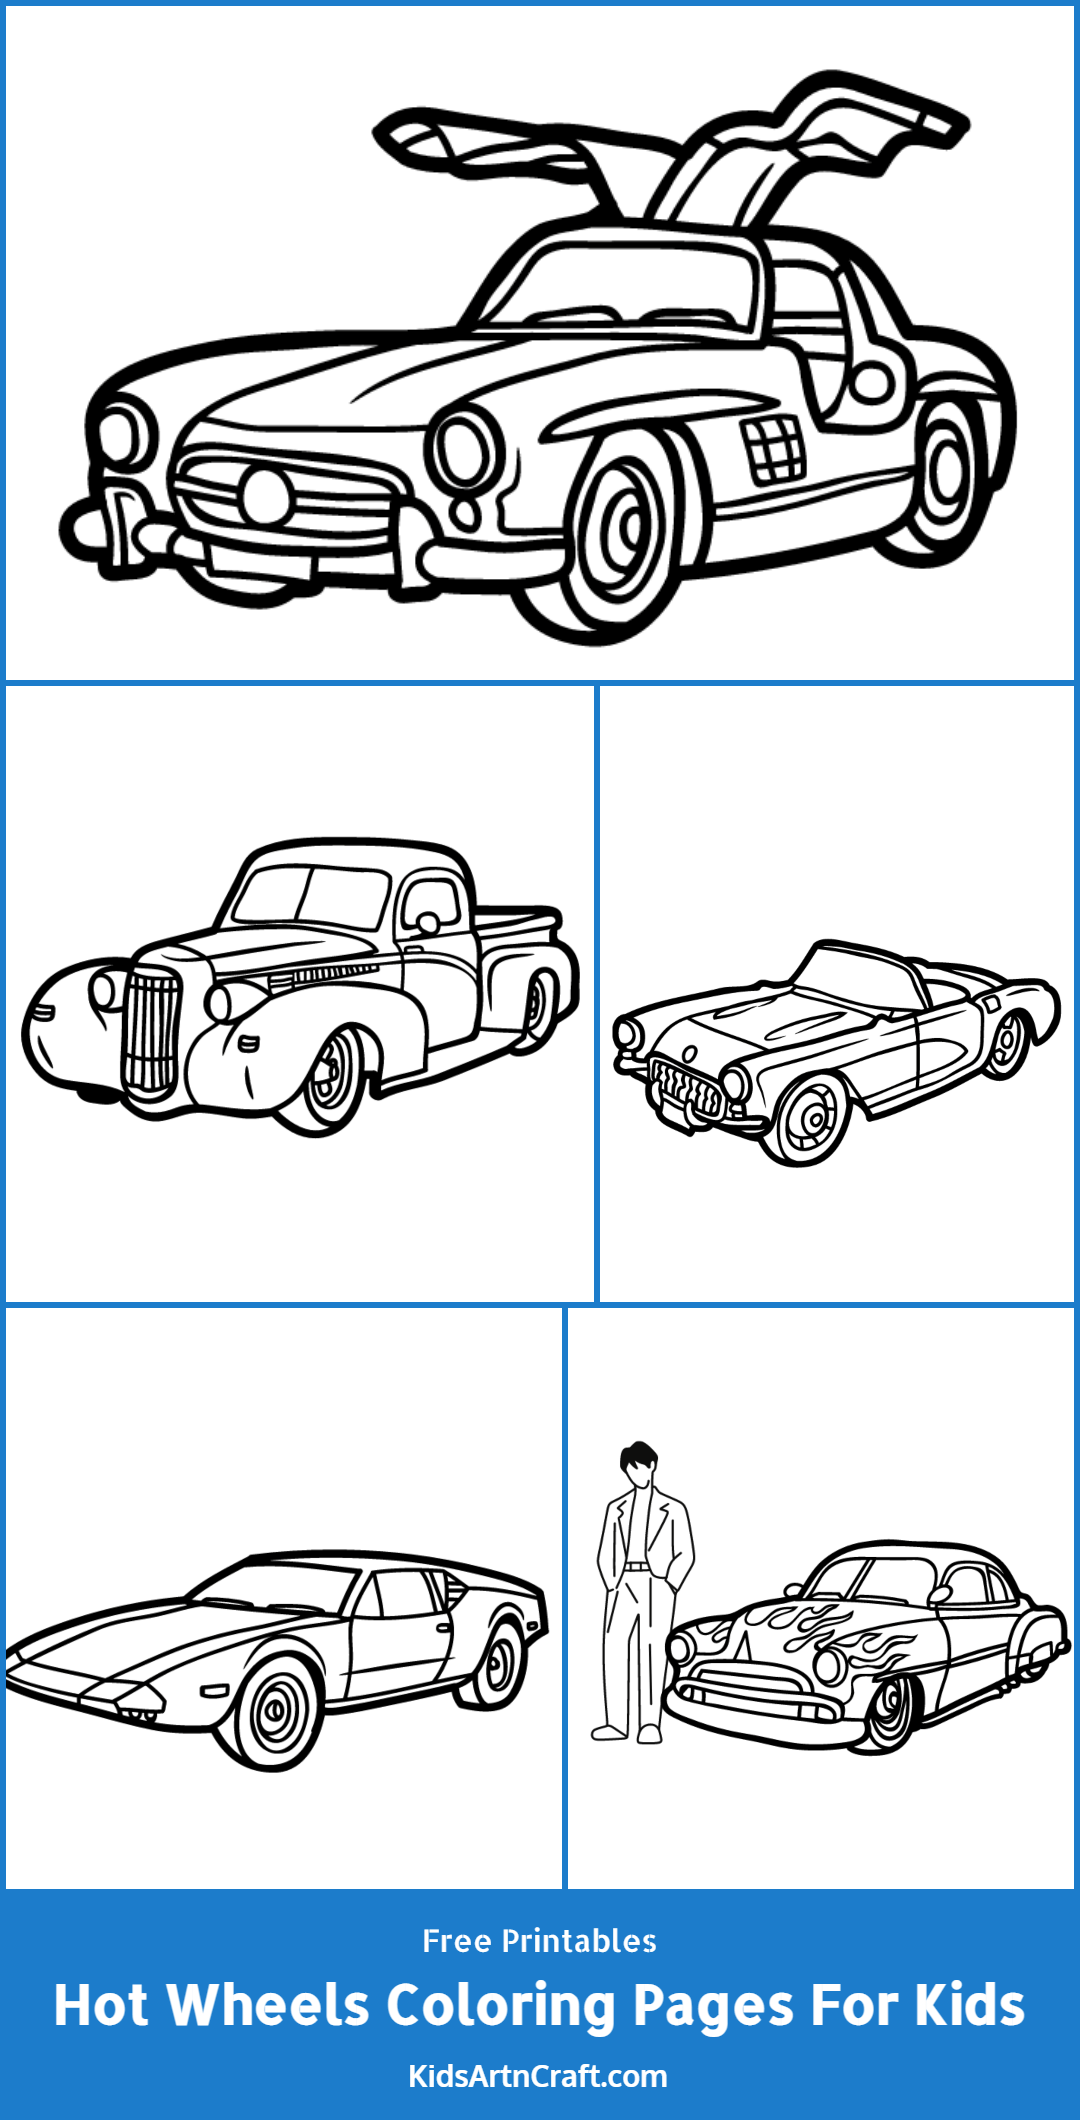 Hot Wheels Coloring Pages For Kids – Free Printables